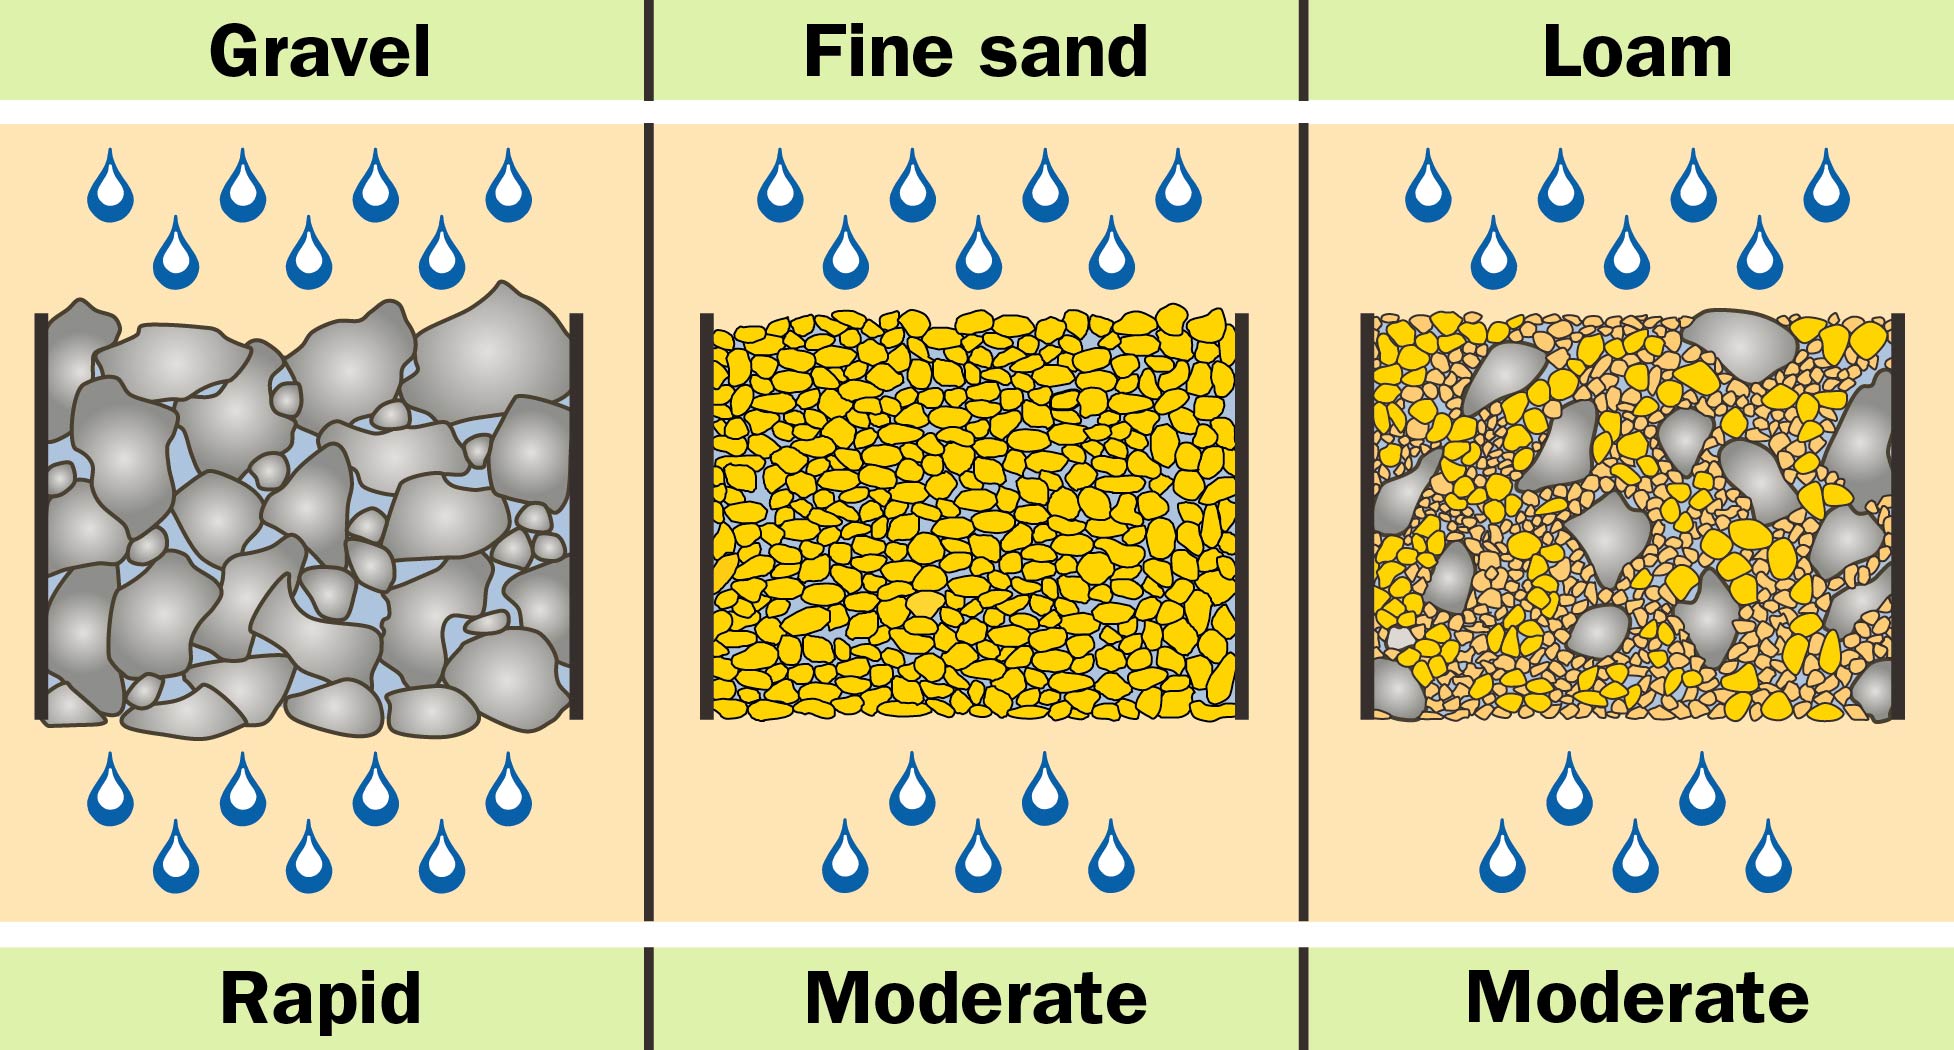 Illustrates how quickly water moves through different geological formations. Water moves quickly through gravel because of its large connected pores. Water moves more slowly through fine sand or loam soils.